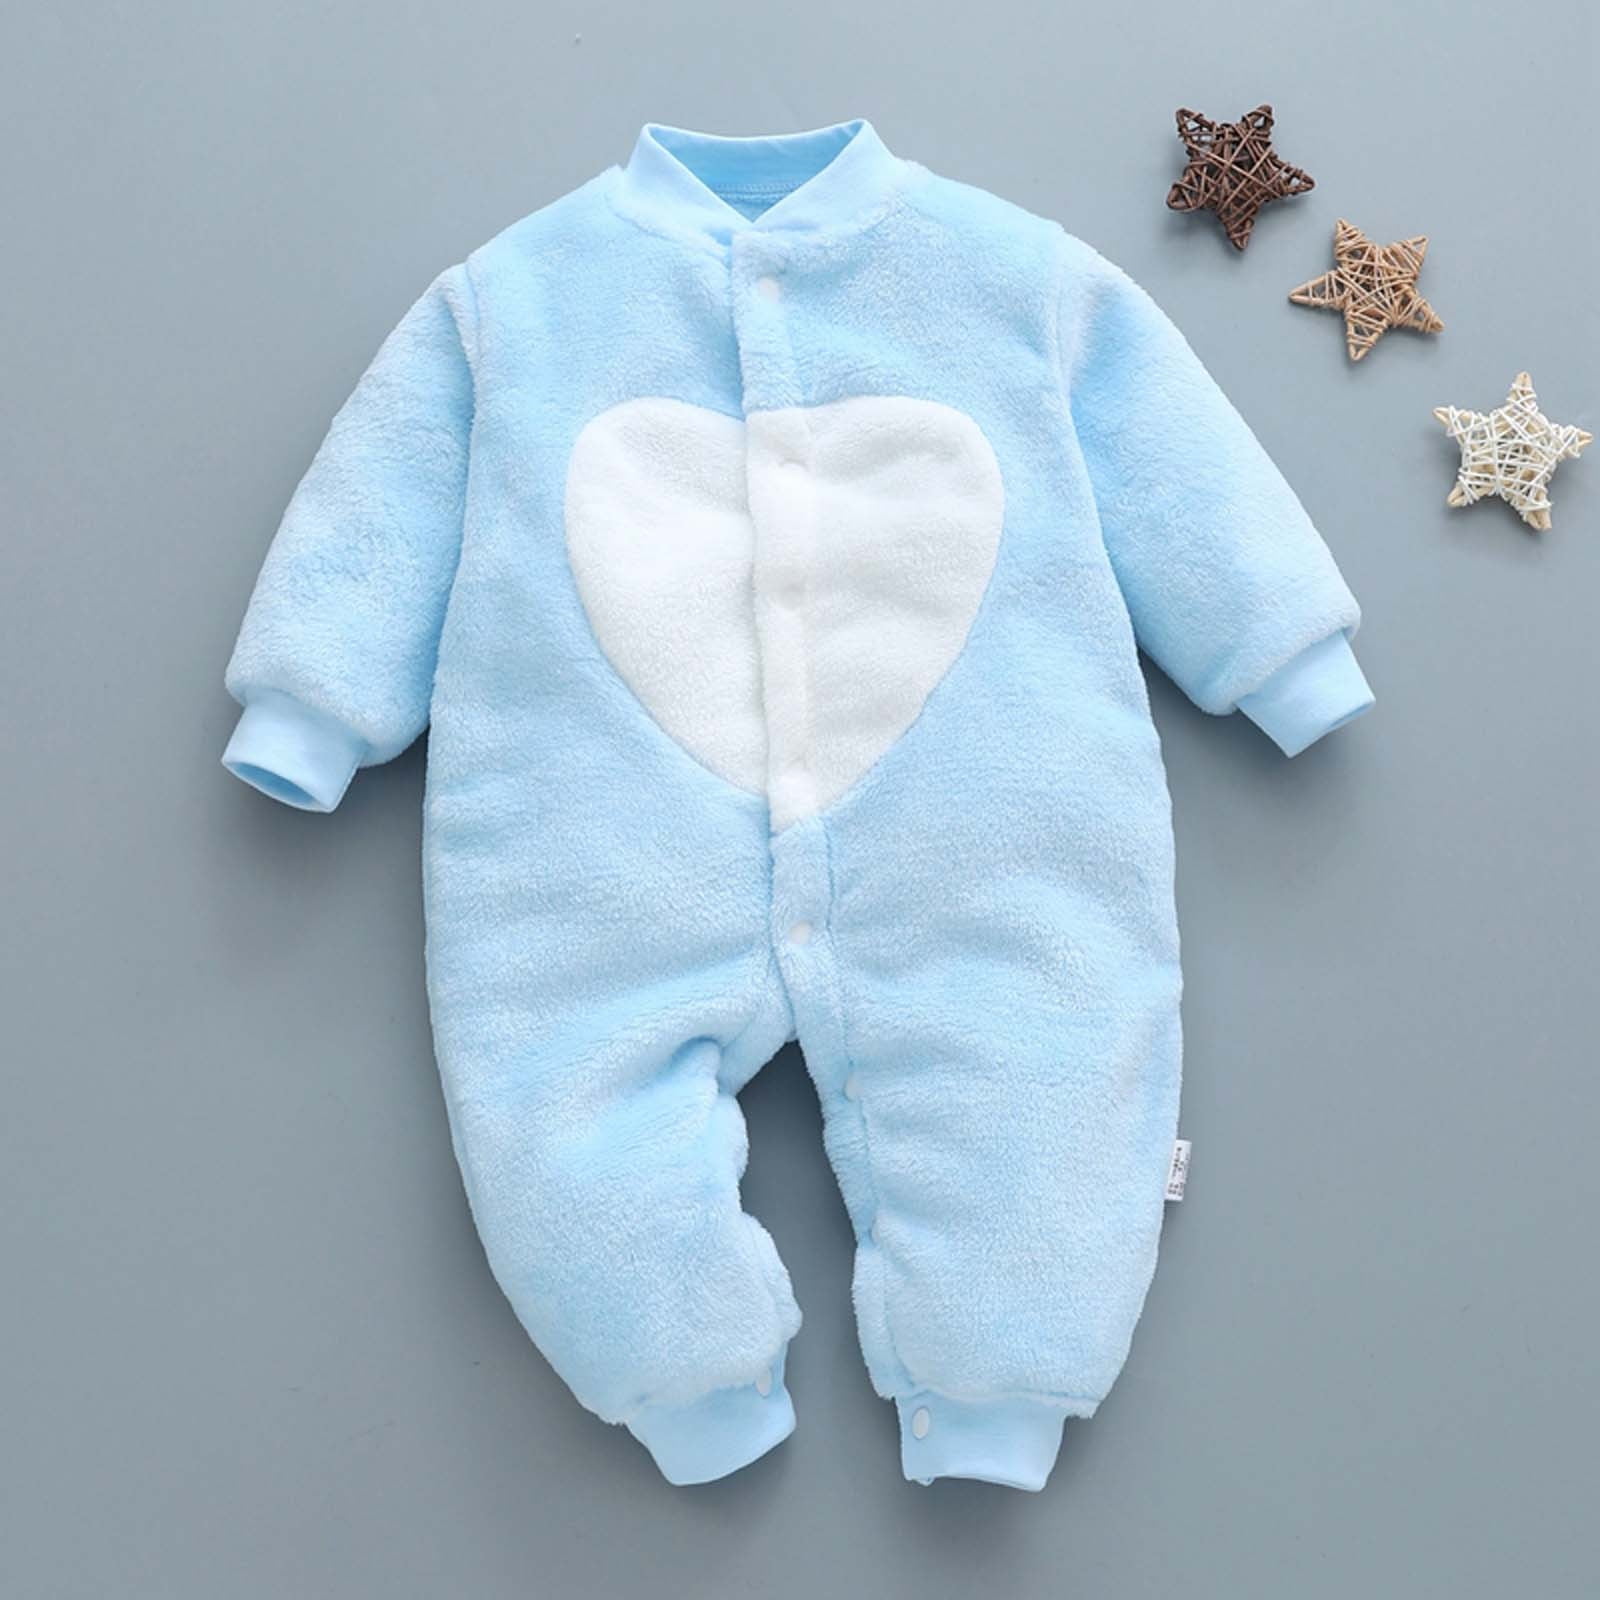 Lolmot Newborn Baby Pajamas with Cuffs, Baby Girls Boys Clothes Gifts Fuzzy  Infant Cotton Onesie Sleeper Pjs Long Sleeve Playsuit on Clearance 